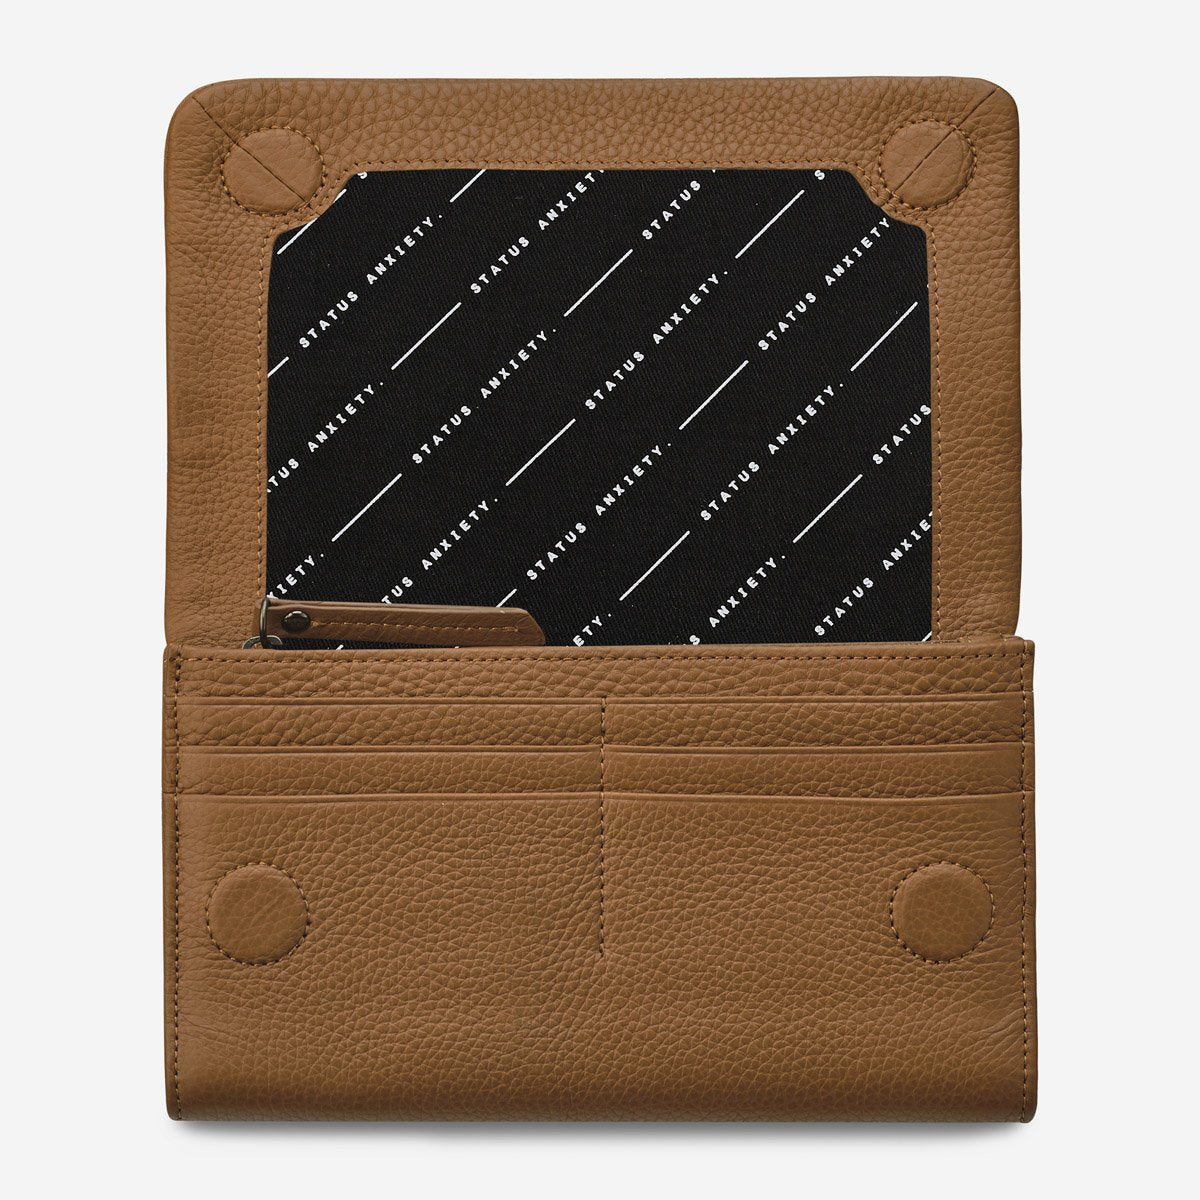 STATUS ANXIETY // Remnant Wallet TAN